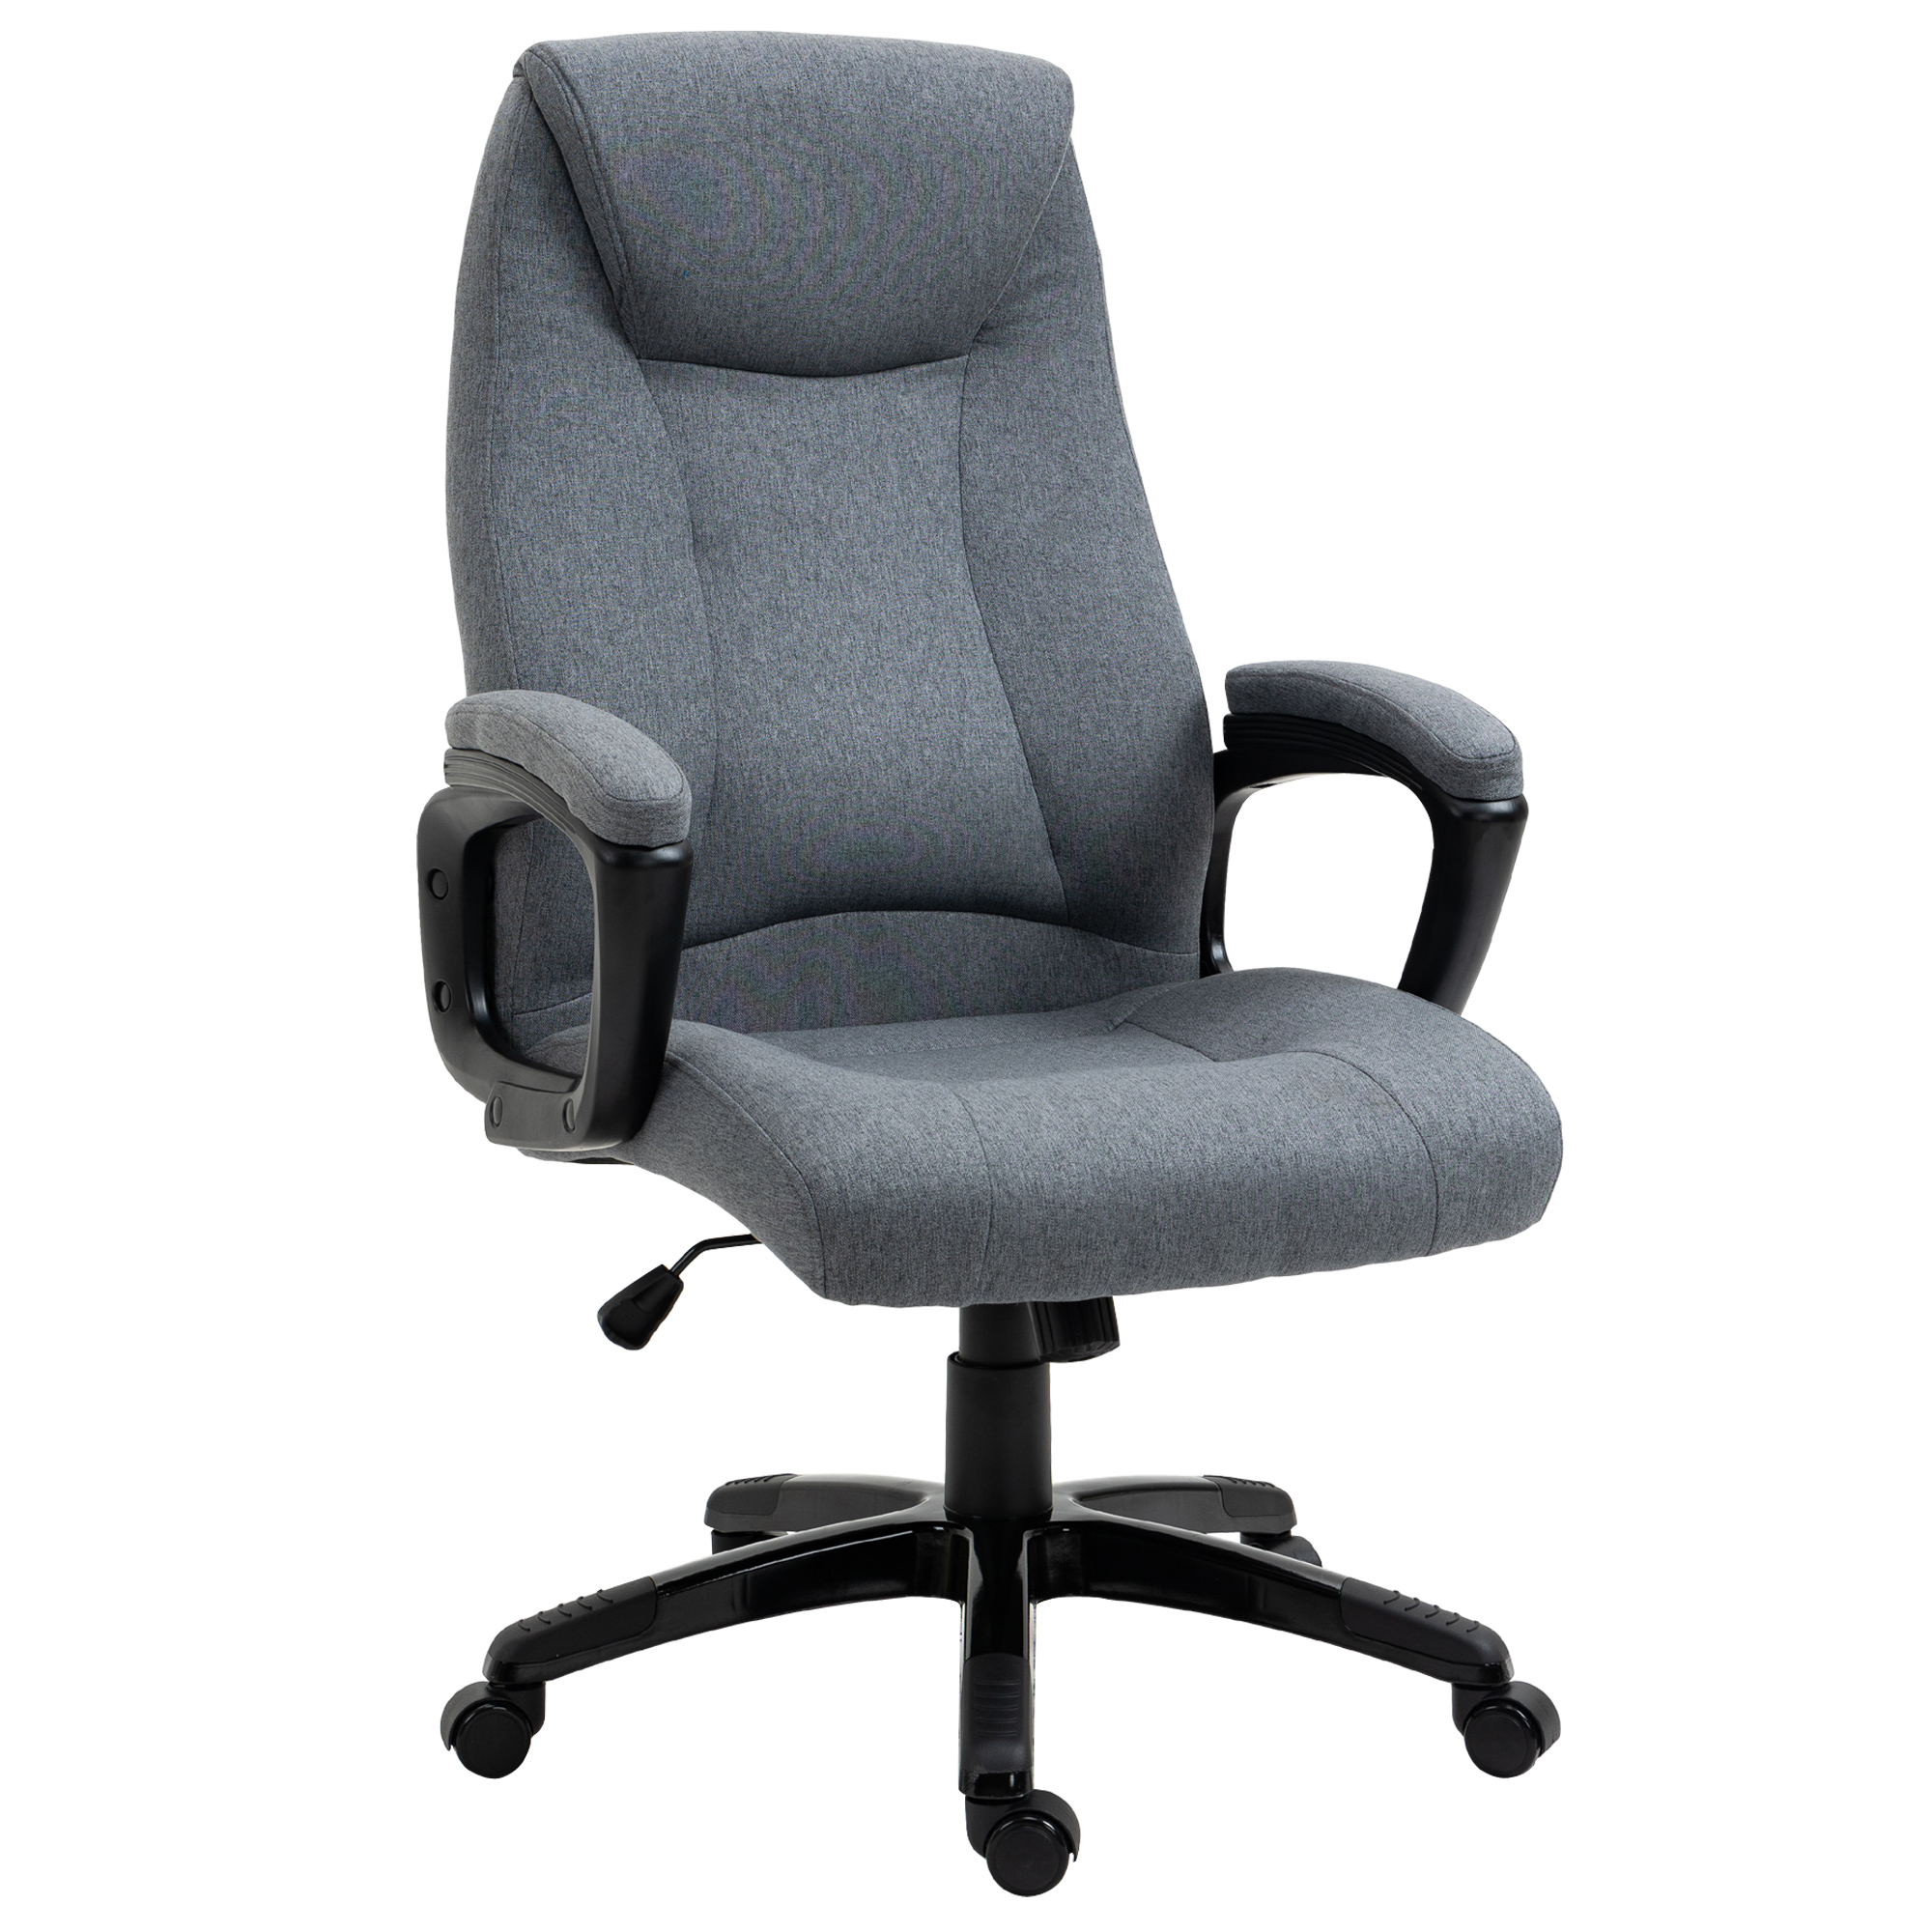 Vinsetto Fabric Home Office Chair, Computer Desk Chair with Tilt Function, Executive Chair with 360 Swivel, Adjustable Height, Padded Armrests and Headrest, Gray - image 1 of 9